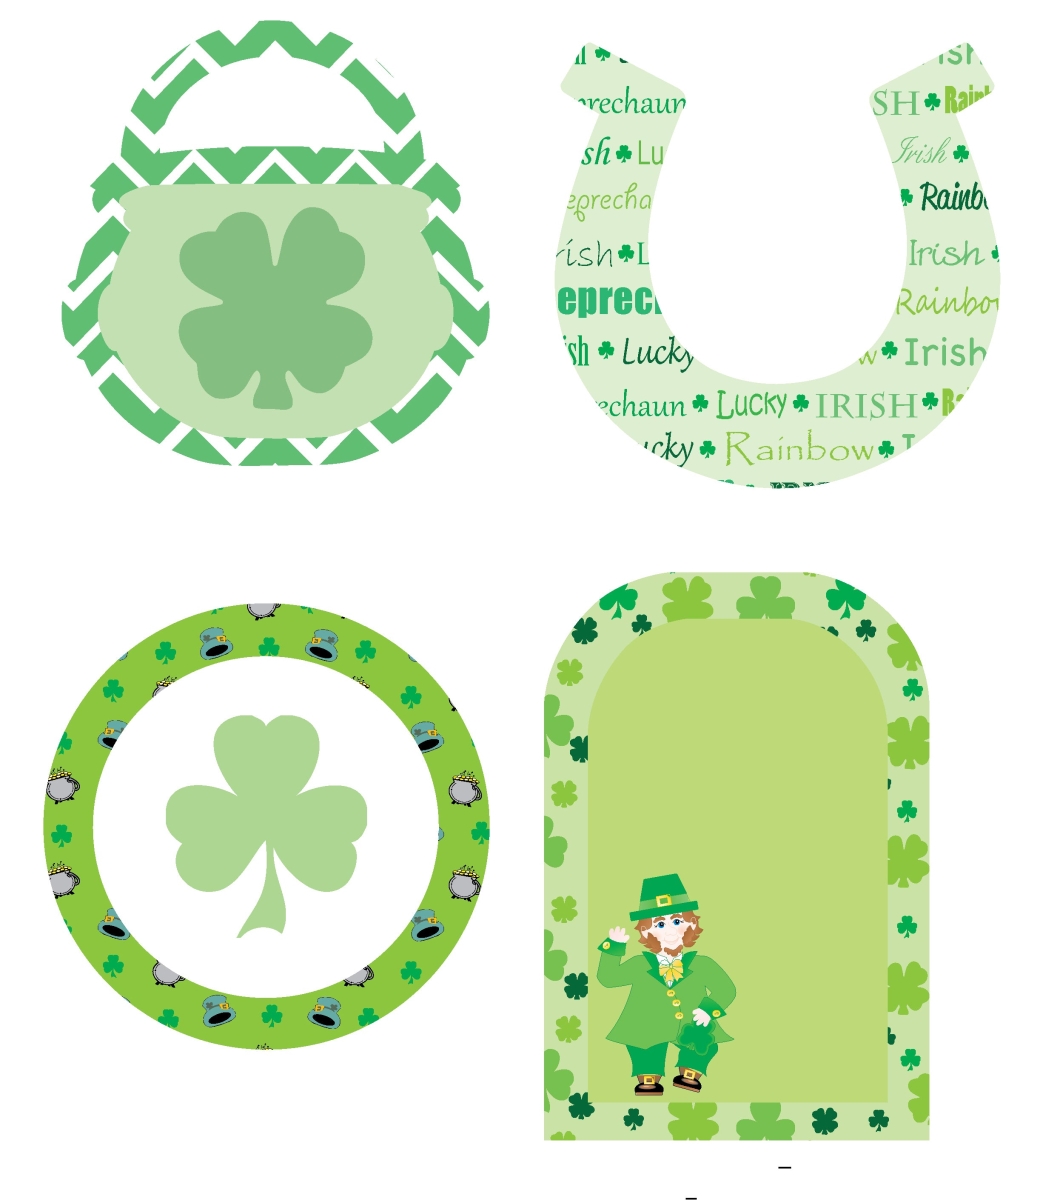 Picture of Creative Shapes Etc SE-1989 5 x 7 in. Large Accents St. Pattys Variety Pack Classroom Decorations